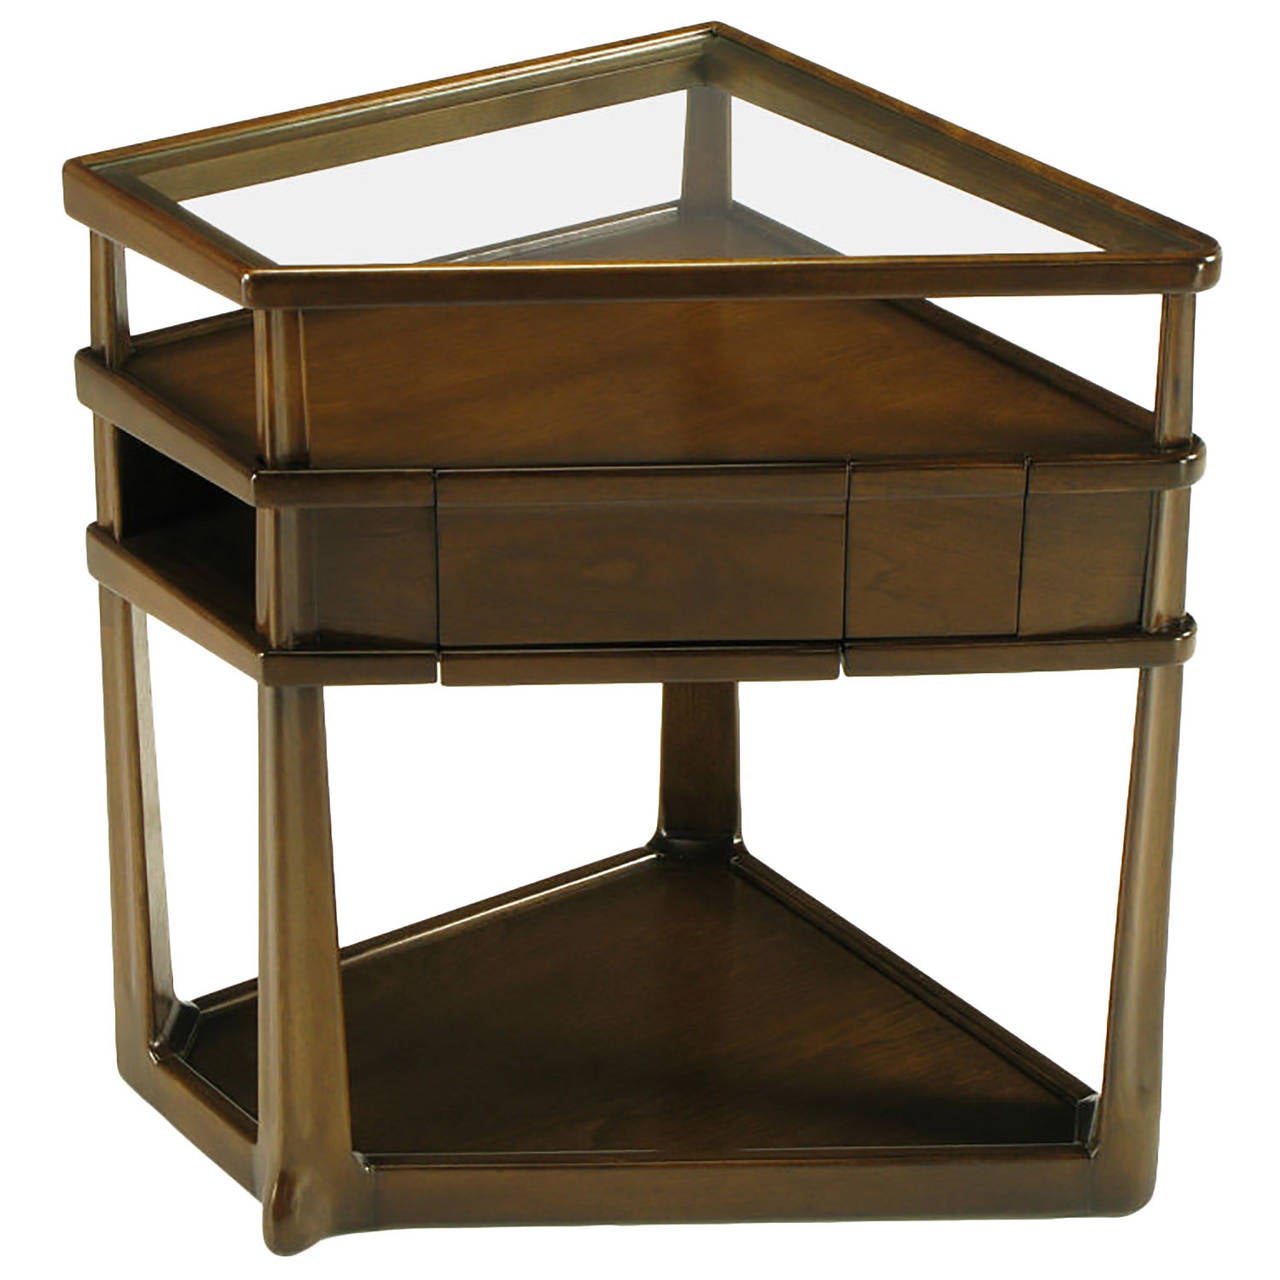 Dark oak hand-carved trapezoidal three-tiered end table by Harold M. Schwartz for Romweber. Three surface levels, with the top being glass. Tapered hand-carved legs are inverted triangular shaped. Run from base to top through the various tiers.